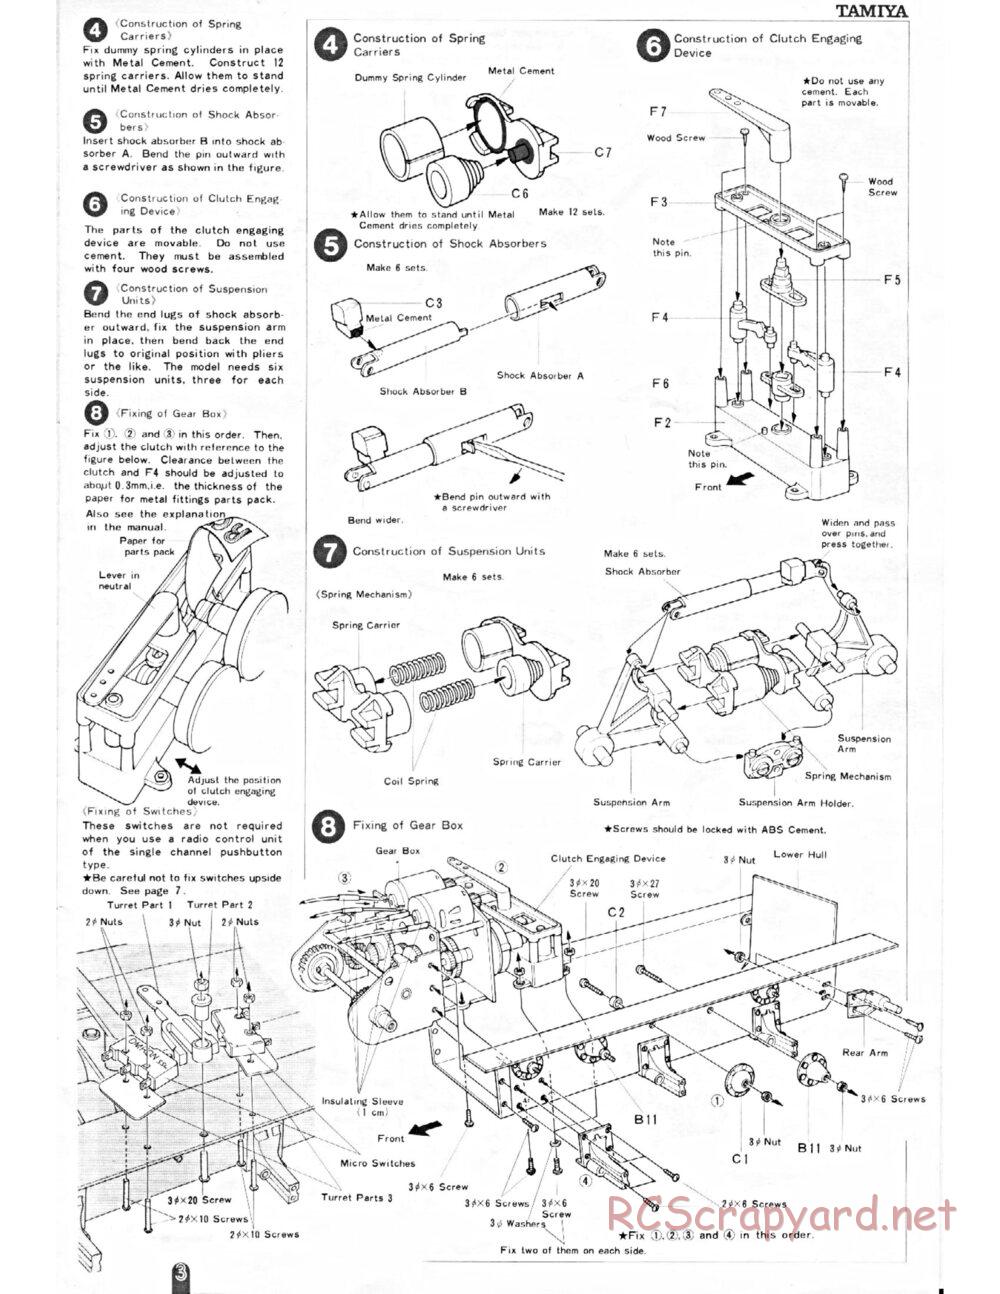 Tamiya - M4 Sherman 105mm Howitzer - 1/16 Scale Chassis - Manual - Page 3